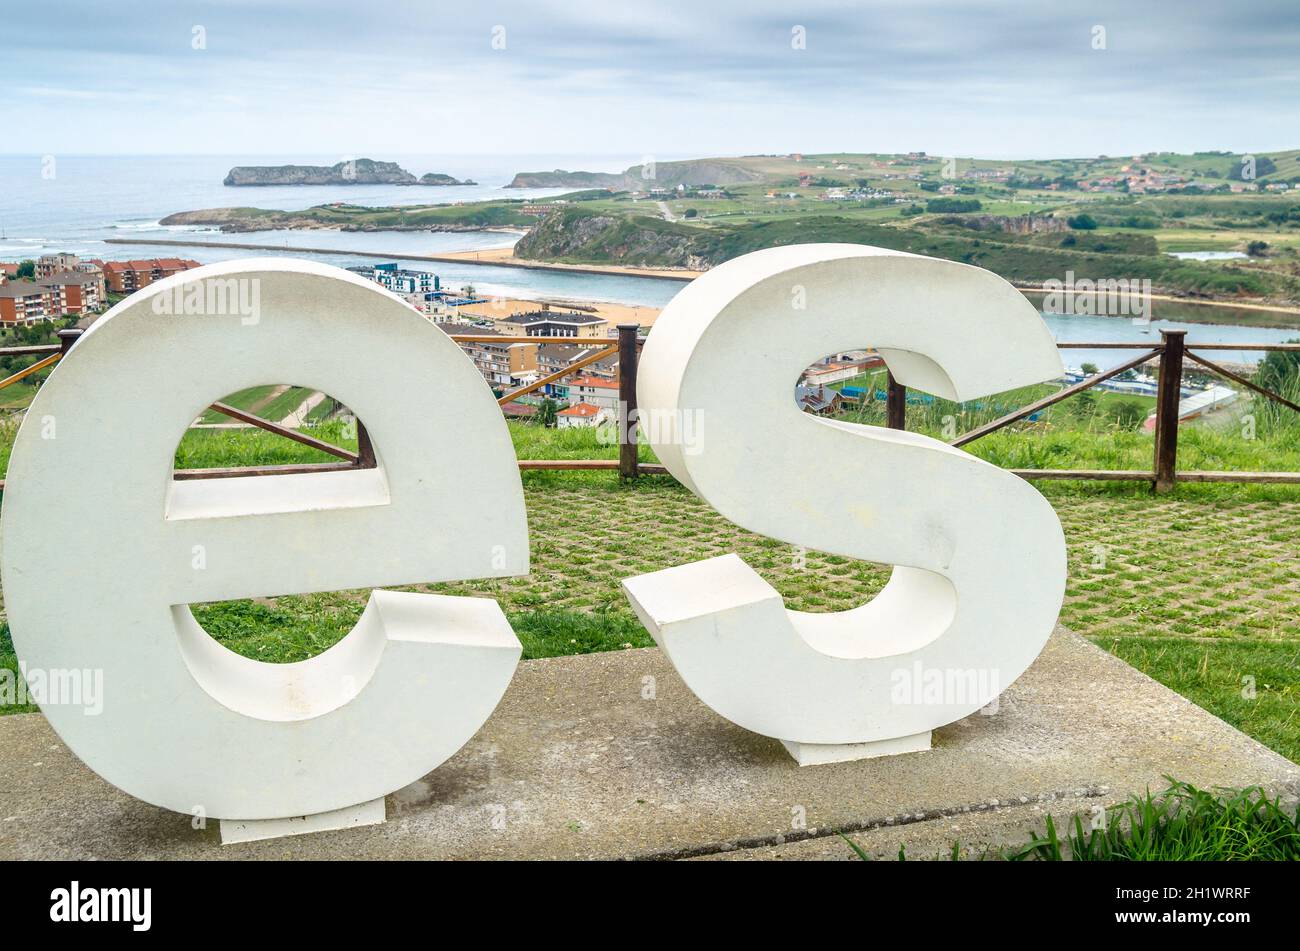 SUANCES, SPAIN - JULY 6, 2021: The last two letters of the sign with the name of Suances located in a viewpoint in front of the confluence of the estu Stock Photo